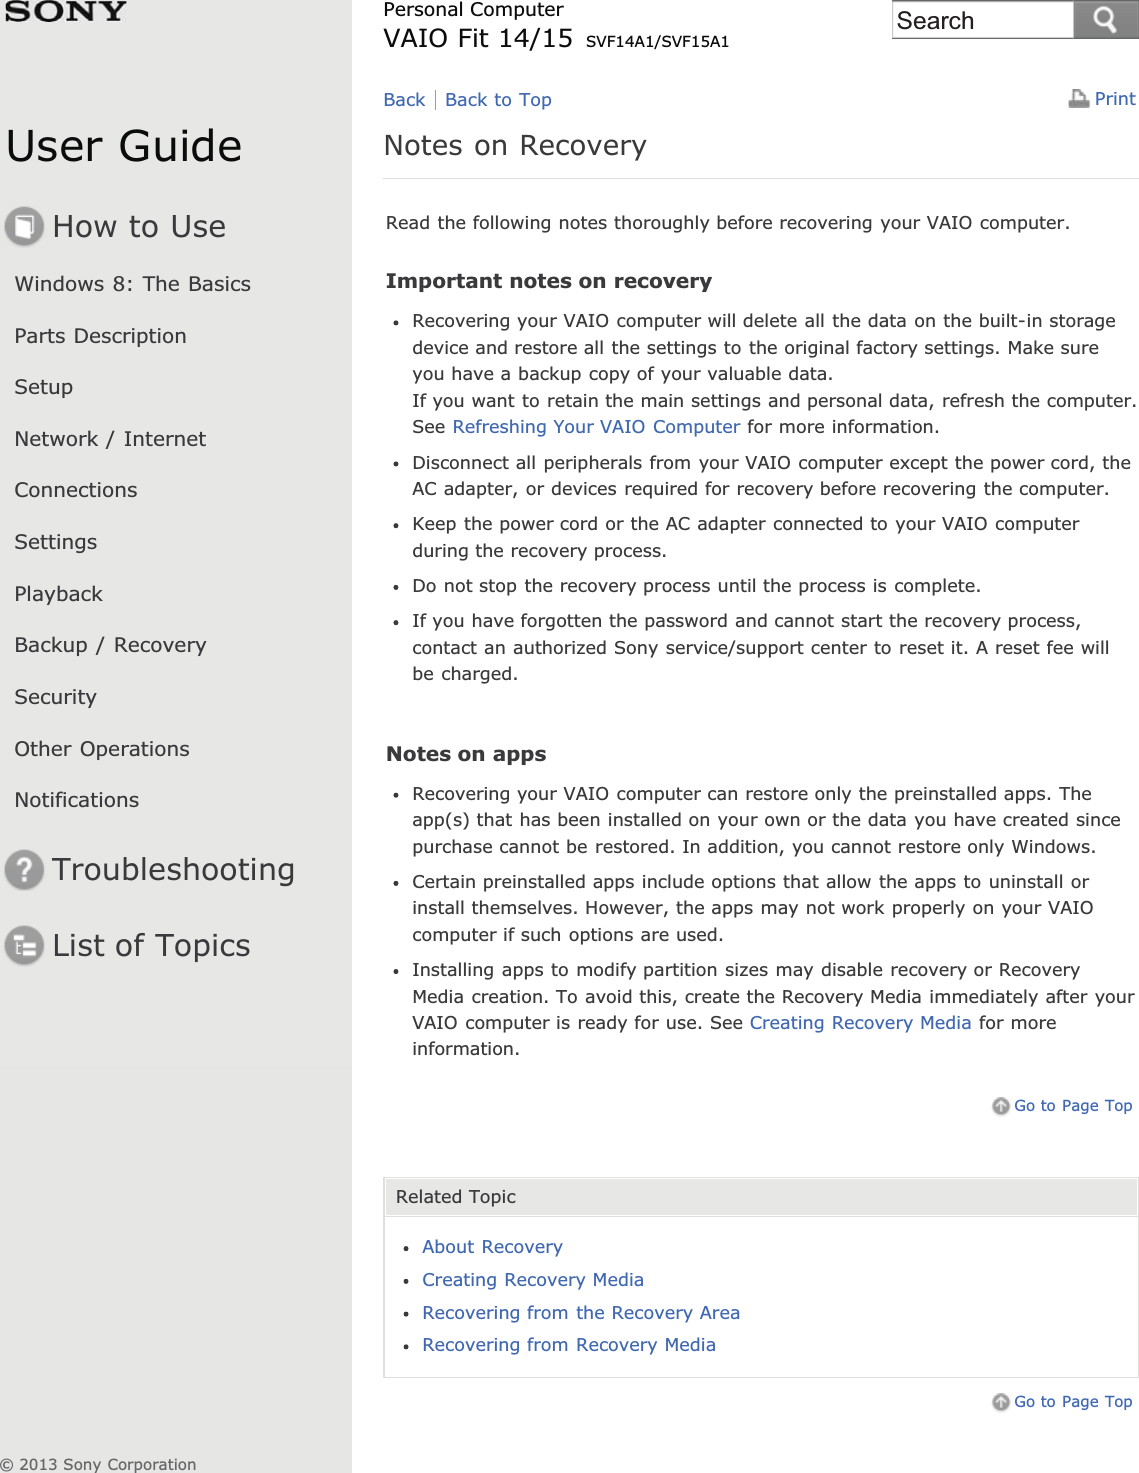 User GuideHow to UseWindows 8: The BasicsParts DescriptionSetupNetwork / InternetConnectionsSettingsPlaybackBackup / RecoverySecurityOther OperationsNotificationsTroubleshootingList of TopicsPrintPersonal ComputerVAIO Fit 14/15 SVF14A1/SVF15A1Notes on RecoveryRead the following notes thoroughly before recovering your VAIO computer.Important notes on recoveryRecovering your VAIO computer will delete all the data on the built-in storagedevice and restore all the settings to the original factory settings. Make sureyou have a backup copy of your valuable data.If you want to retain the main settings and personal data, refresh the computer.See Refreshing Your VAIO Computer for more information.Disconnect all peripherals from your VAIO computer except the power cord, theAC adapter, or devices required for recovery before recovering the computer.Keep the power cord or the AC adapter connected to your VAIO computerduring the recovery process.Do not stop the recovery process until the process is complete.If you have forgotten the password and cannot start the recovery process,contact an authorized Sony service/support center to reset it. A reset fee willbe charged.Notes on appsRecovering your VAIO computer can restore only the preinstalled apps. Theapp(s) that has been installed on your own or the data you have created sincepurchase cannot be restored. In addition, you cannot restore only Windows.Certain preinstalled apps include options that allow the apps to uninstall orinstall themselves. However, the apps may not work properly on your VAIOcomputer if such options are used.Installing apps to modify partition sizes may disable recovery or RecoveryMedia creation. To avoid this, create the Recovery Media immediately after yourVAIO computer is ready for use. See Creating Recovery Media for moreinformation.Go to Page TopRelated TopicAbout RecoveryCreating Recovery MediaRecovering from the Recovery AreaRecovering from Recovery MediaGo to Page TopBack Back to Top© 2013 Sony CorporationSearch